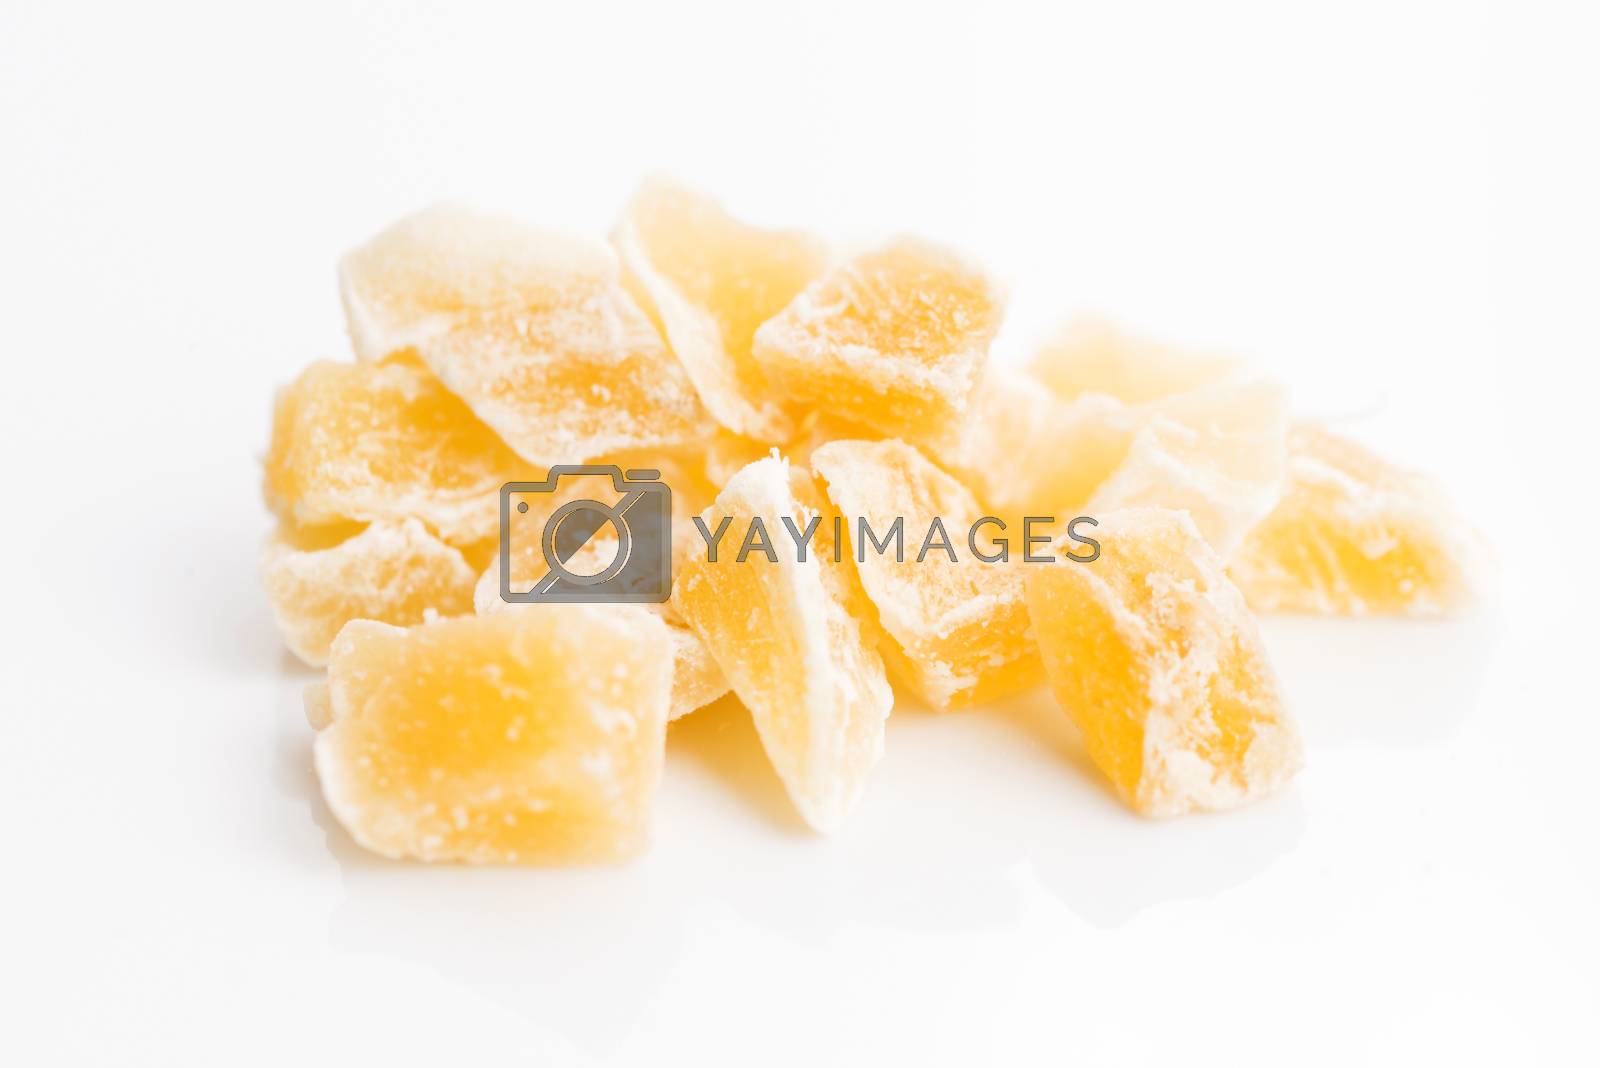 Royalty free image of Caramelized ginger candy pieces isolated on white background by joannawnuk